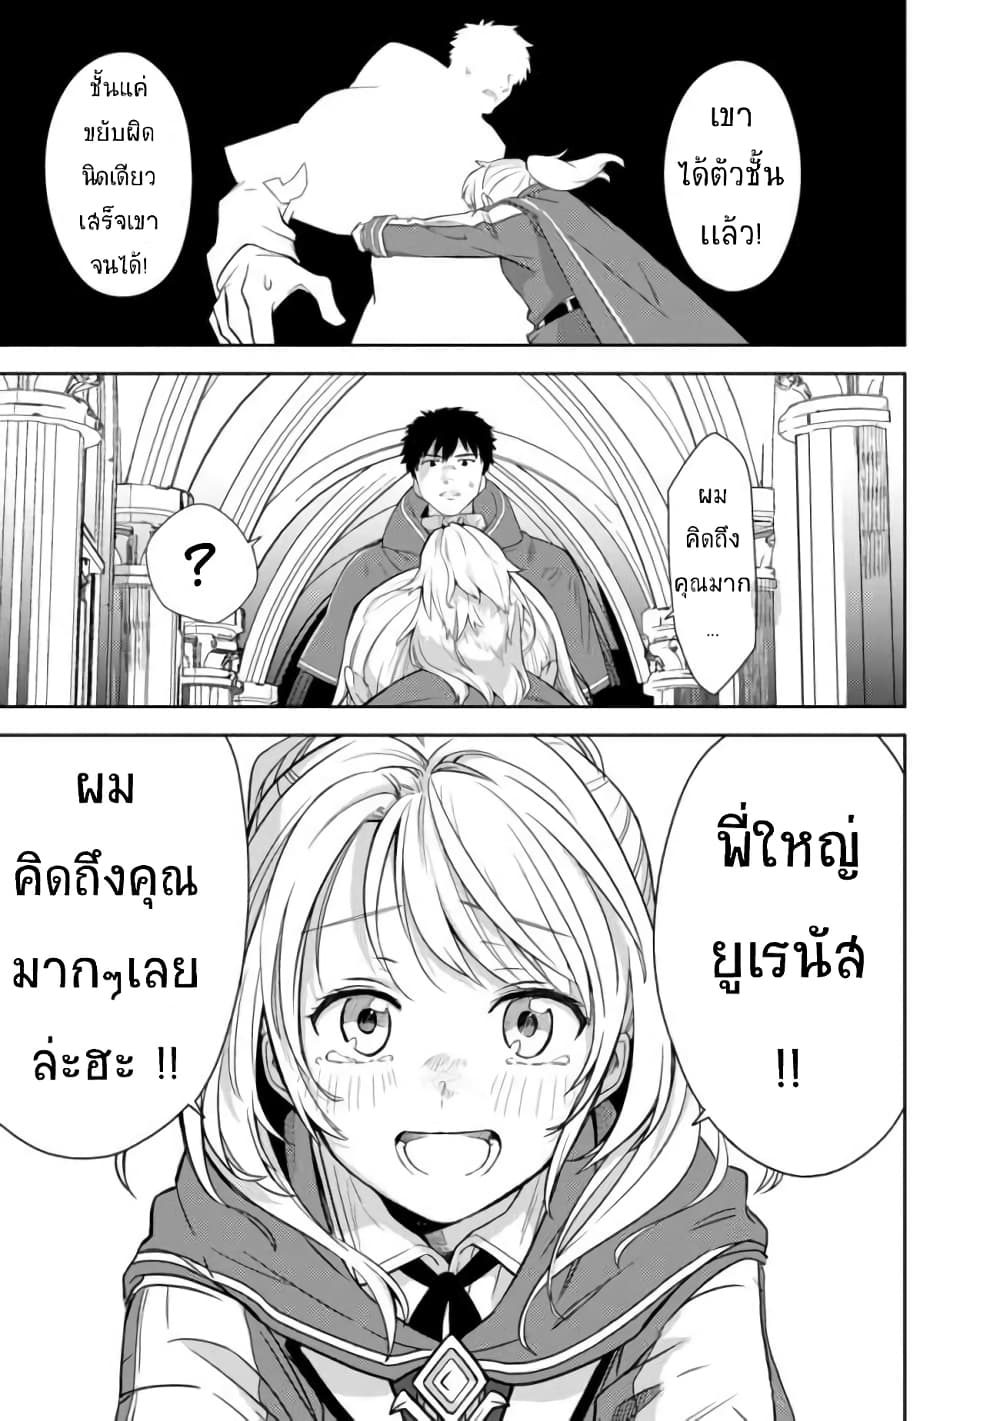 The Reincarnated Swordsman With 9999 Strength Wants to Become a Magician! ตอนที่ 1. 2 (35)